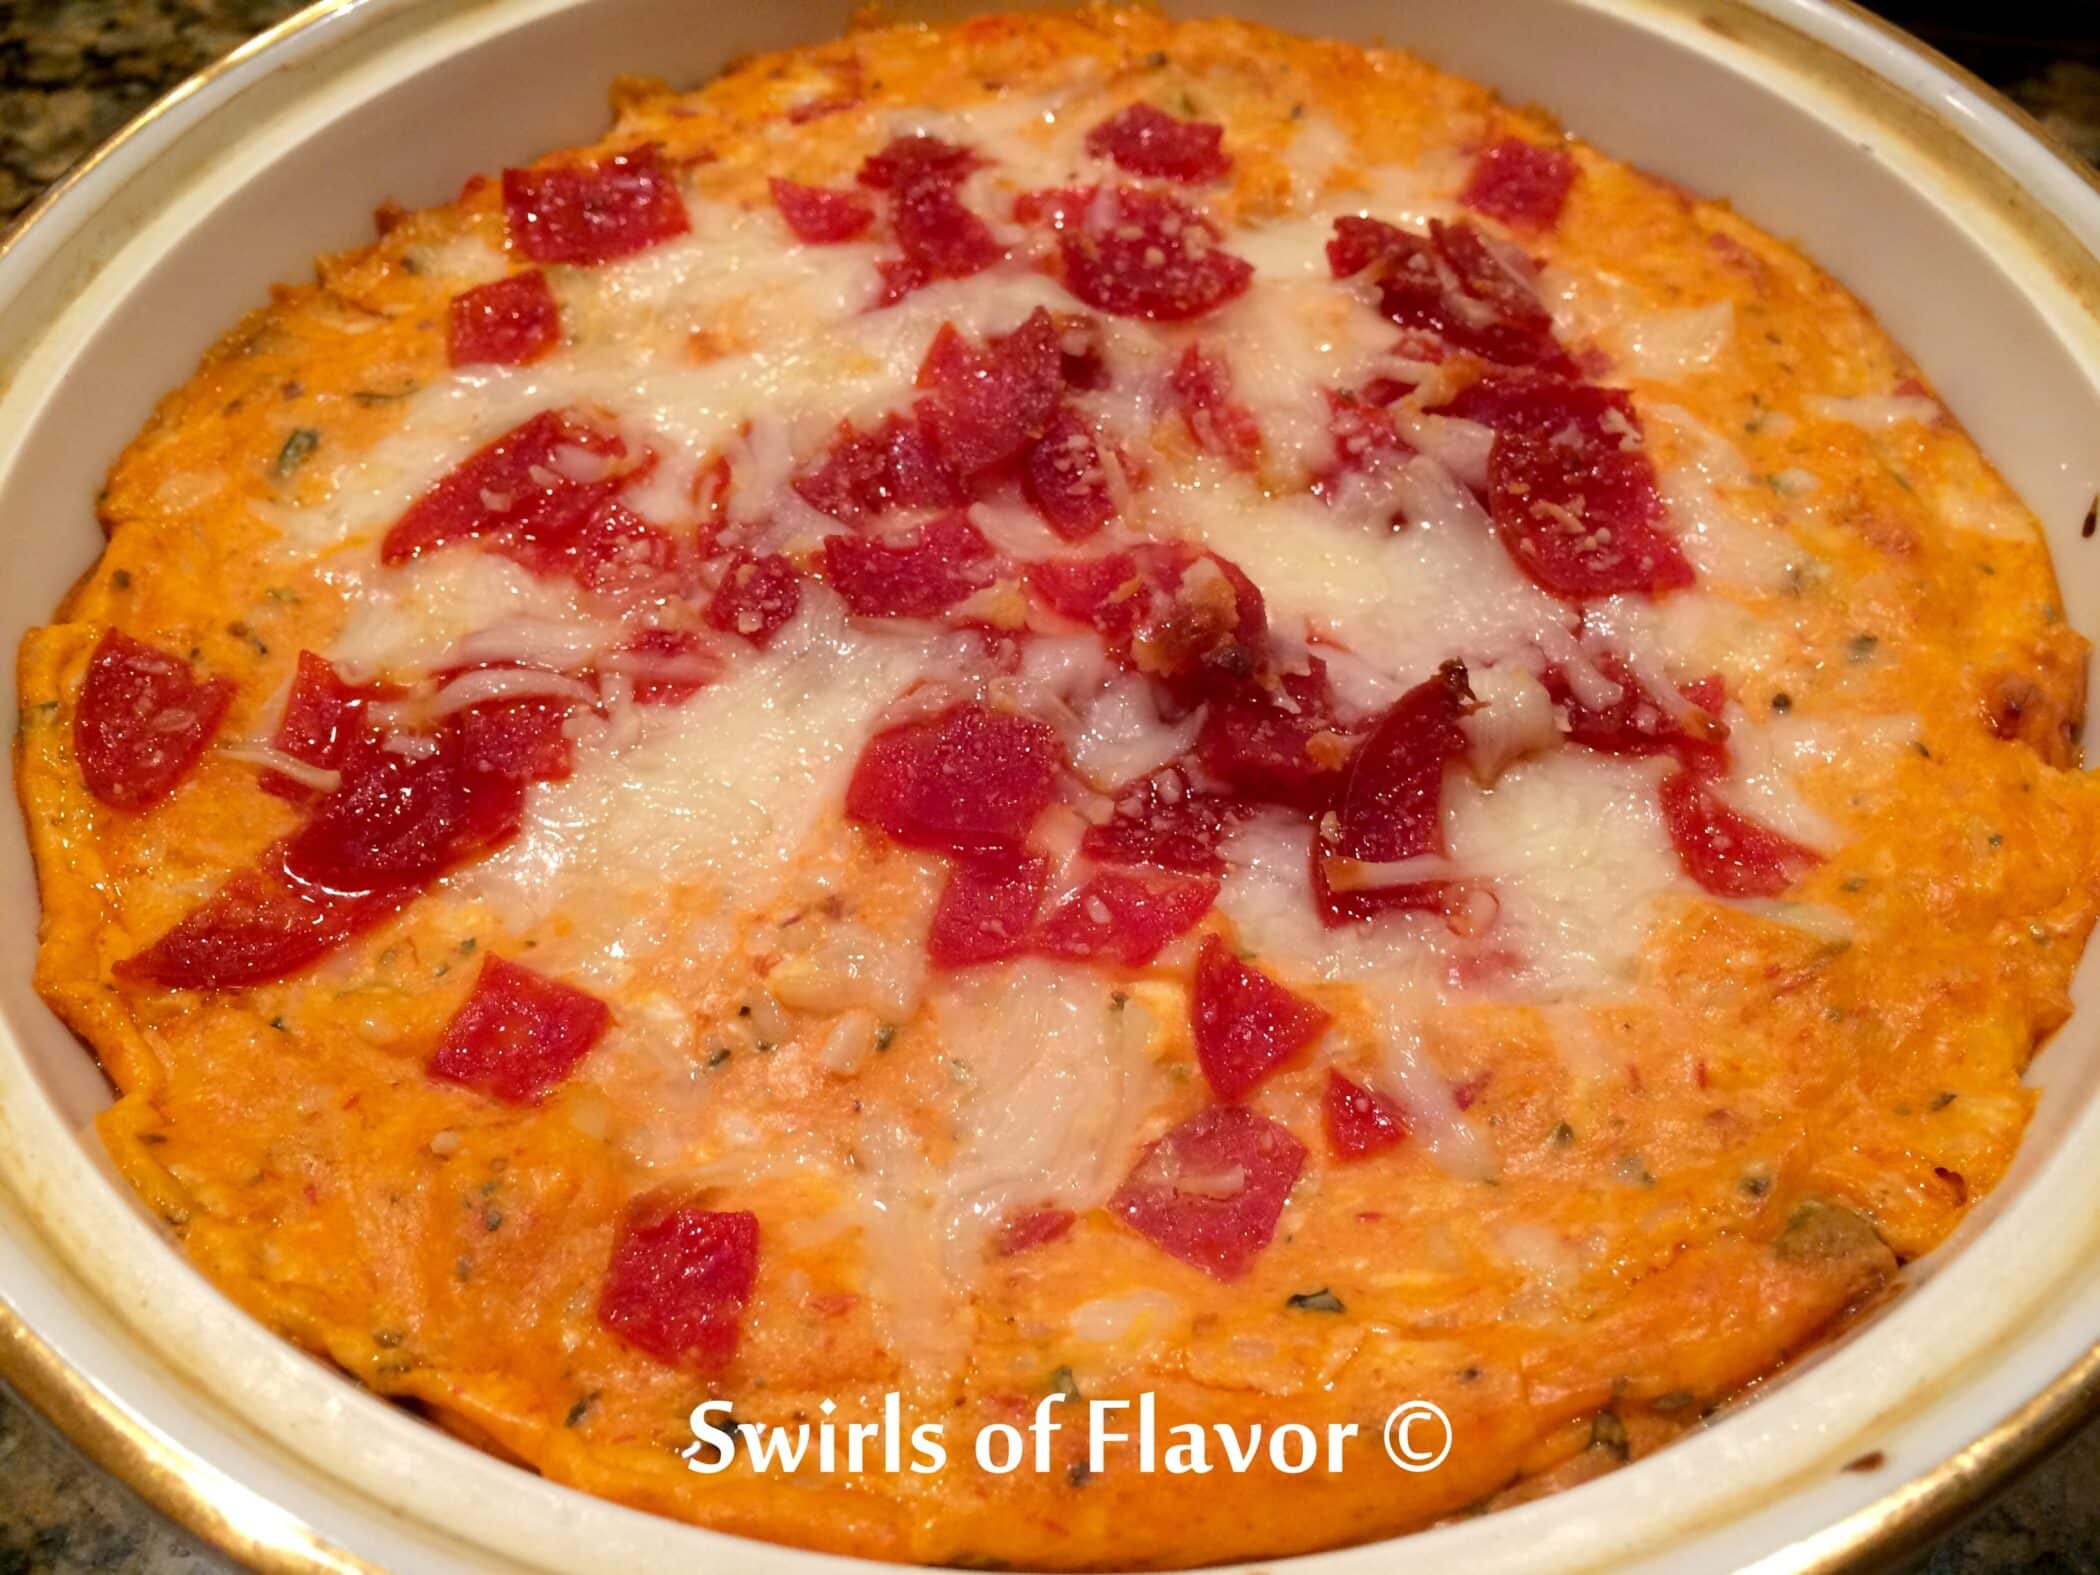 Pepperoni Pizza Dip is a cheesy pizza-flavored hot dip studded with bits of pepperoni. All the flavors of a pepperoni pizza baked in a creamy dip! Delicious when served with slices of crusty Italian bread.